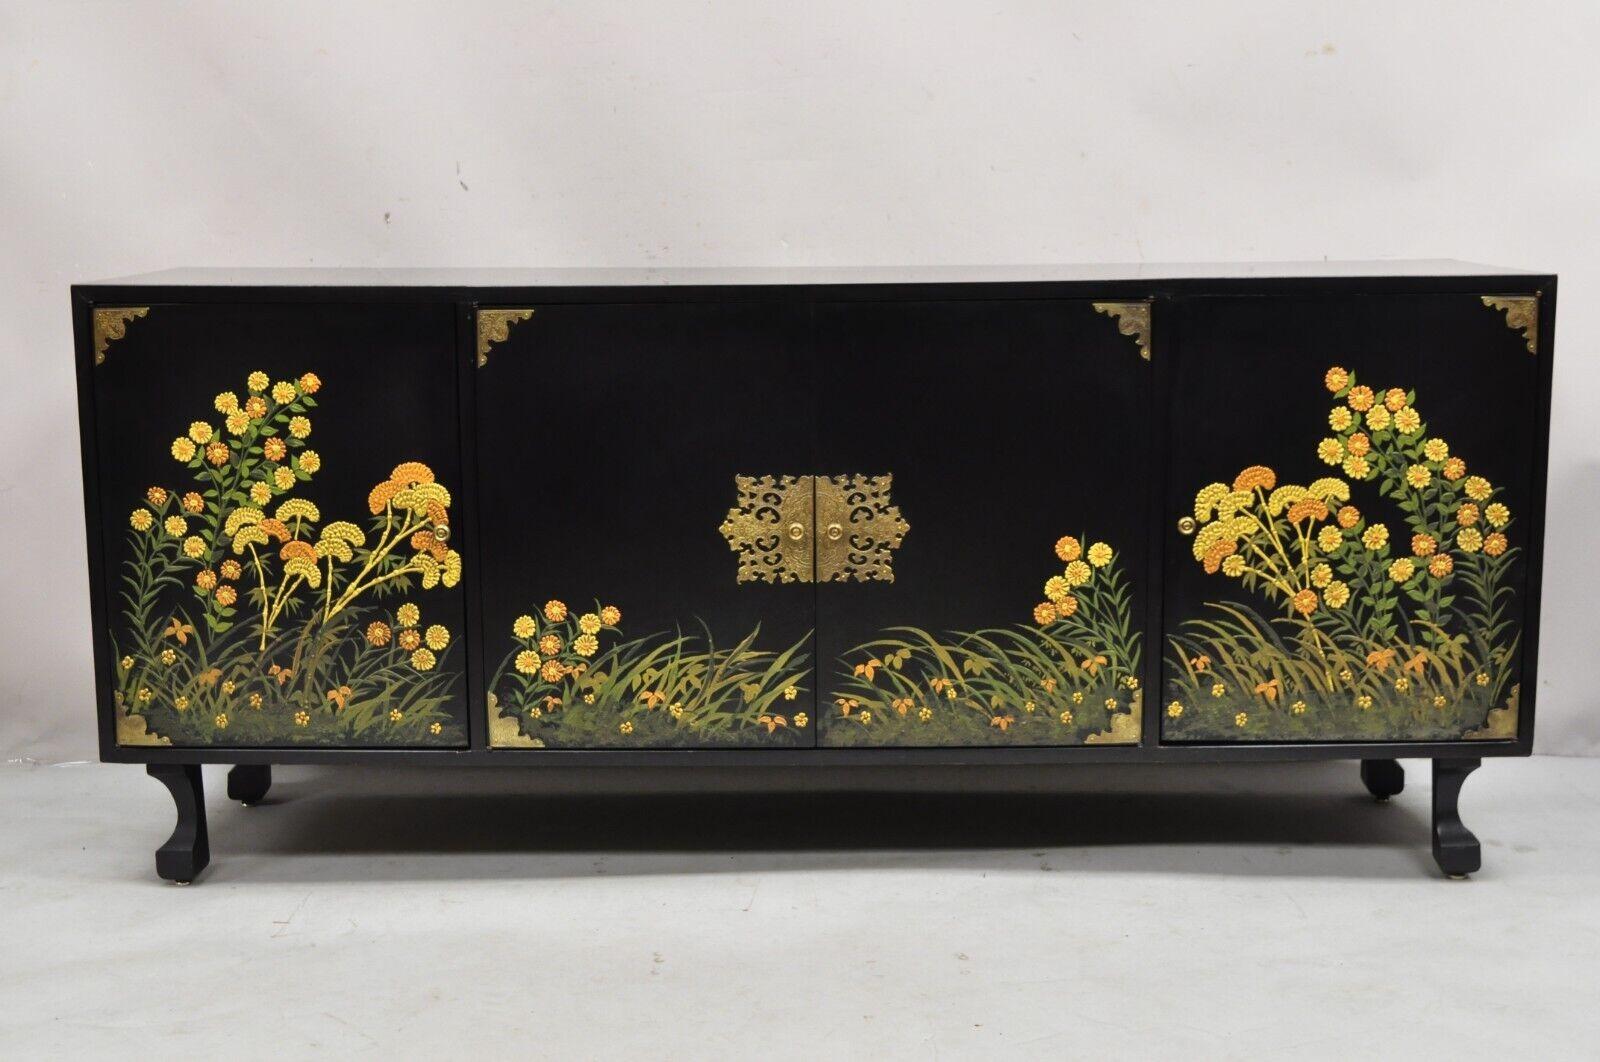 Vintage Chinoiserie Black Lacquer Hand Painted Floral Credenza Cabinet Sideboard For Sale 6